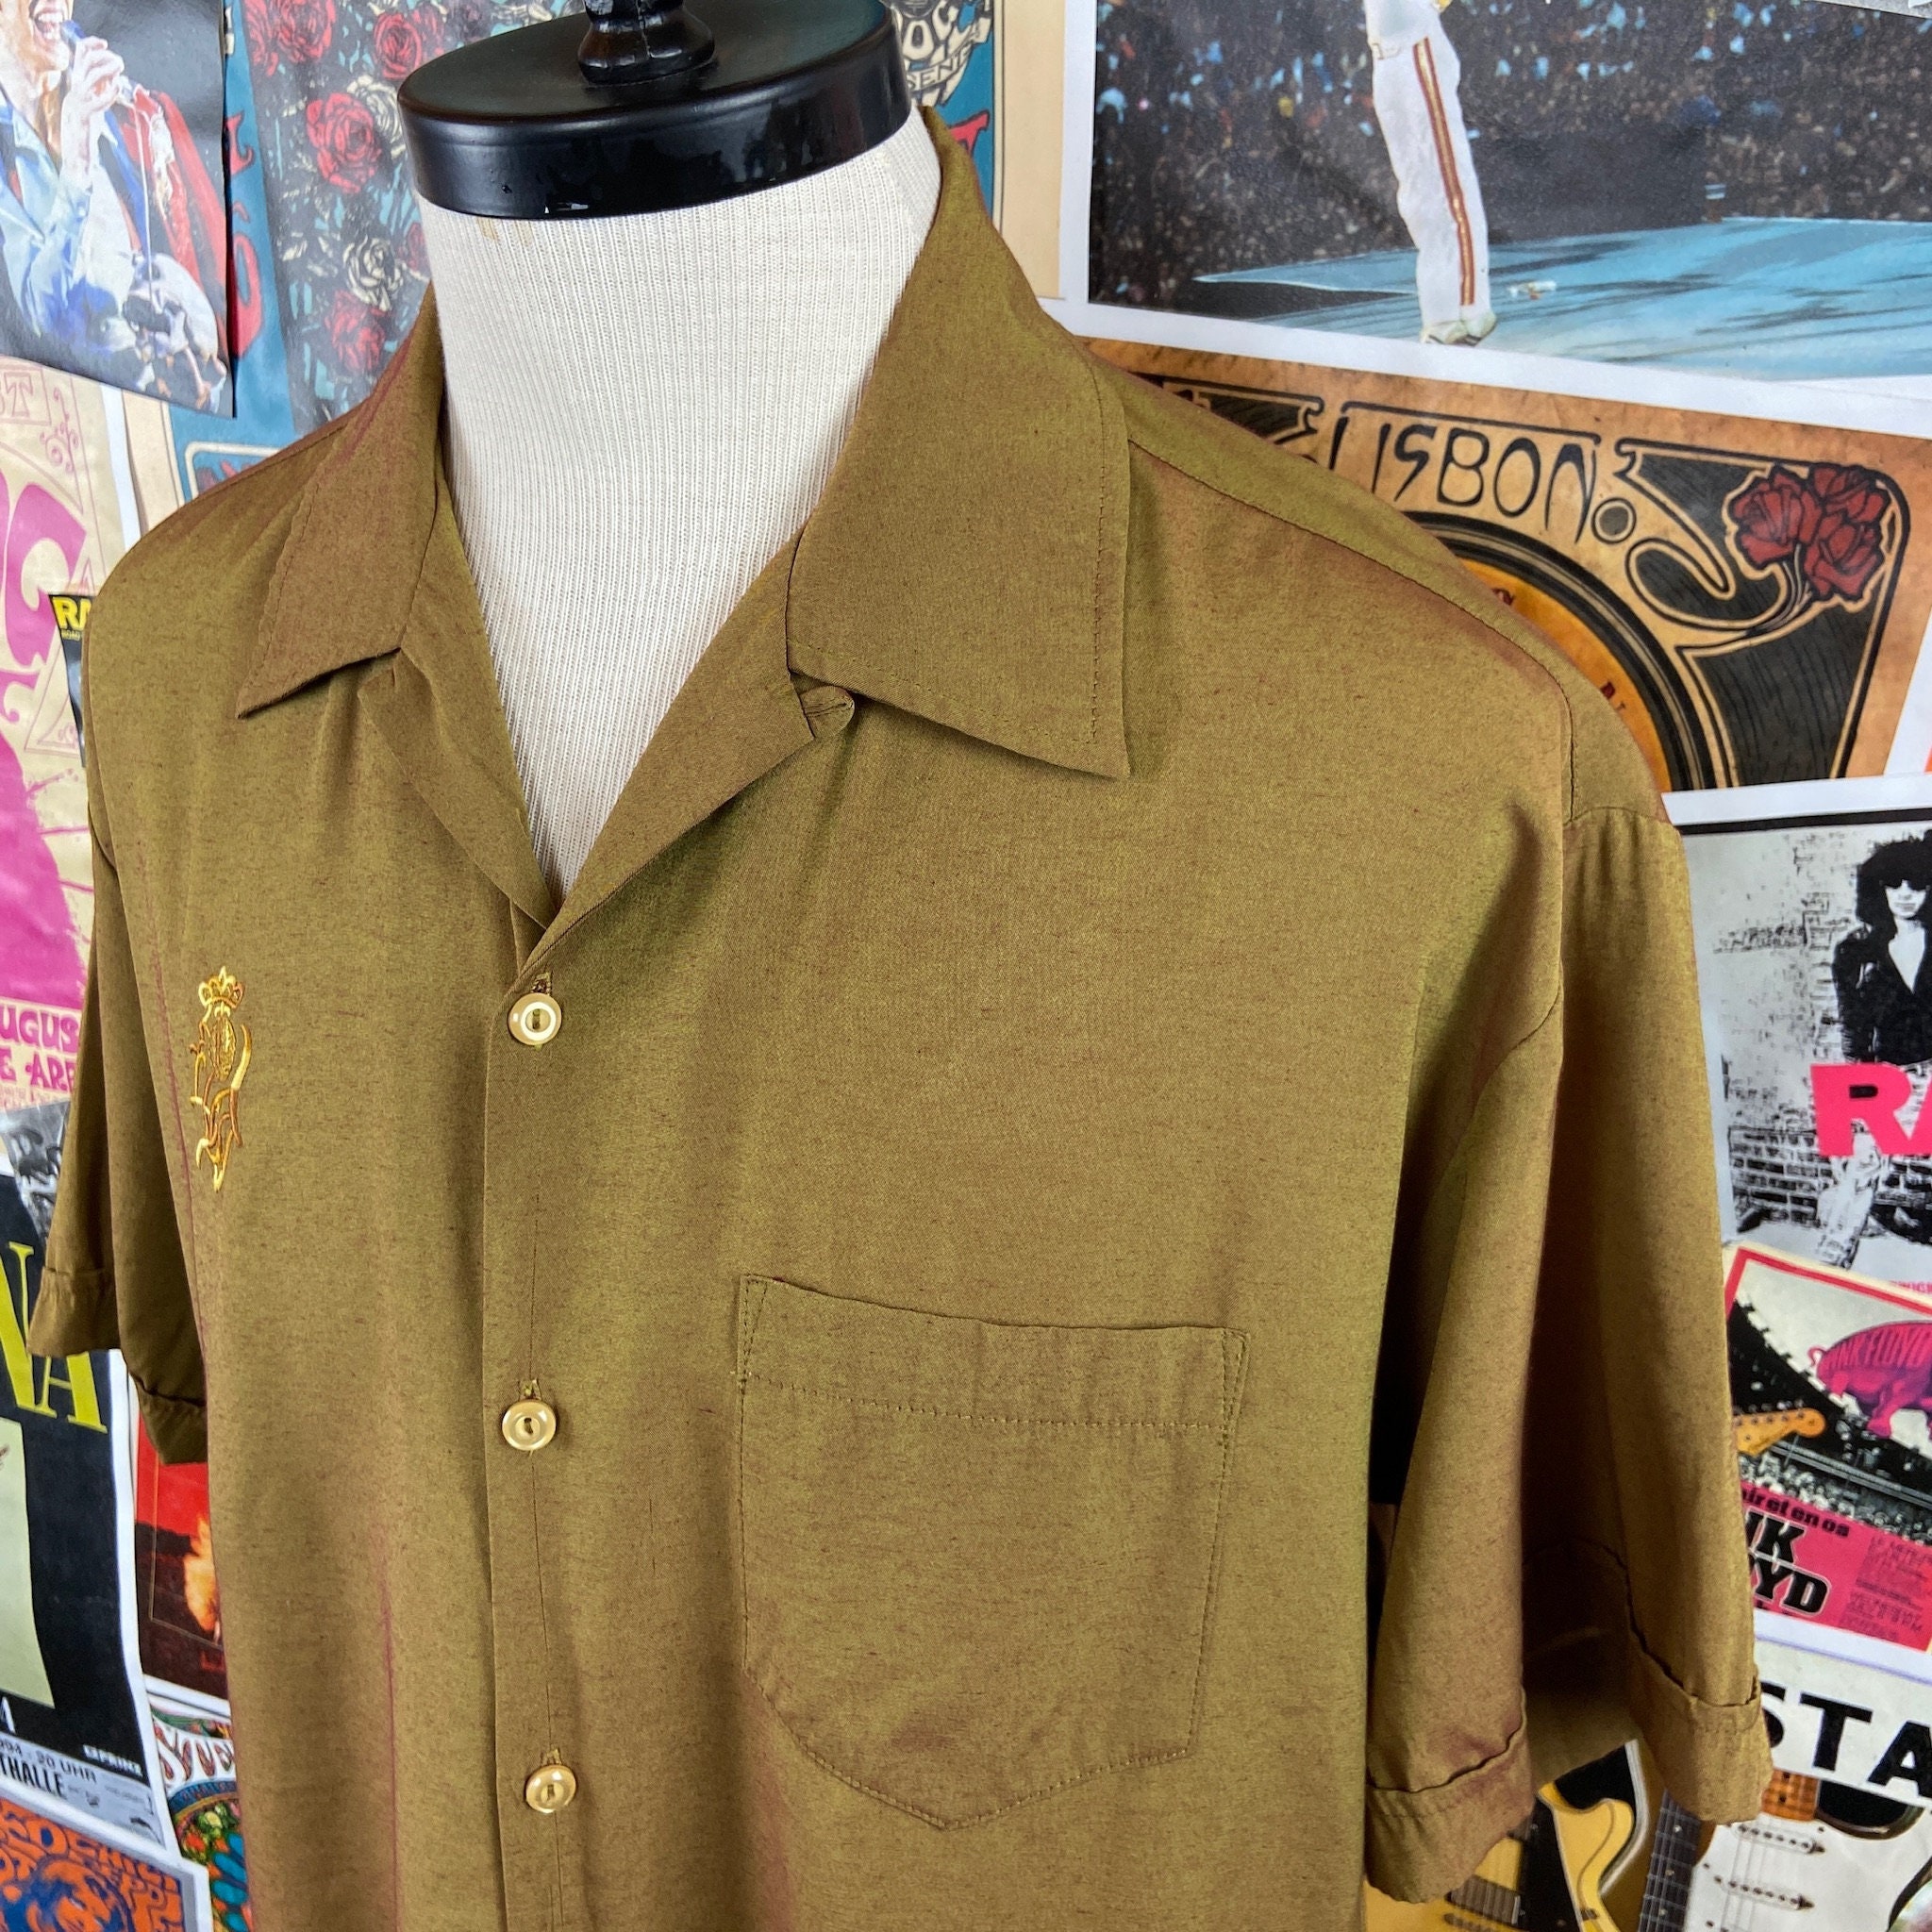 Vintage Mens 1990s Does 1950s-60s BC Ethic Lounge Rayon